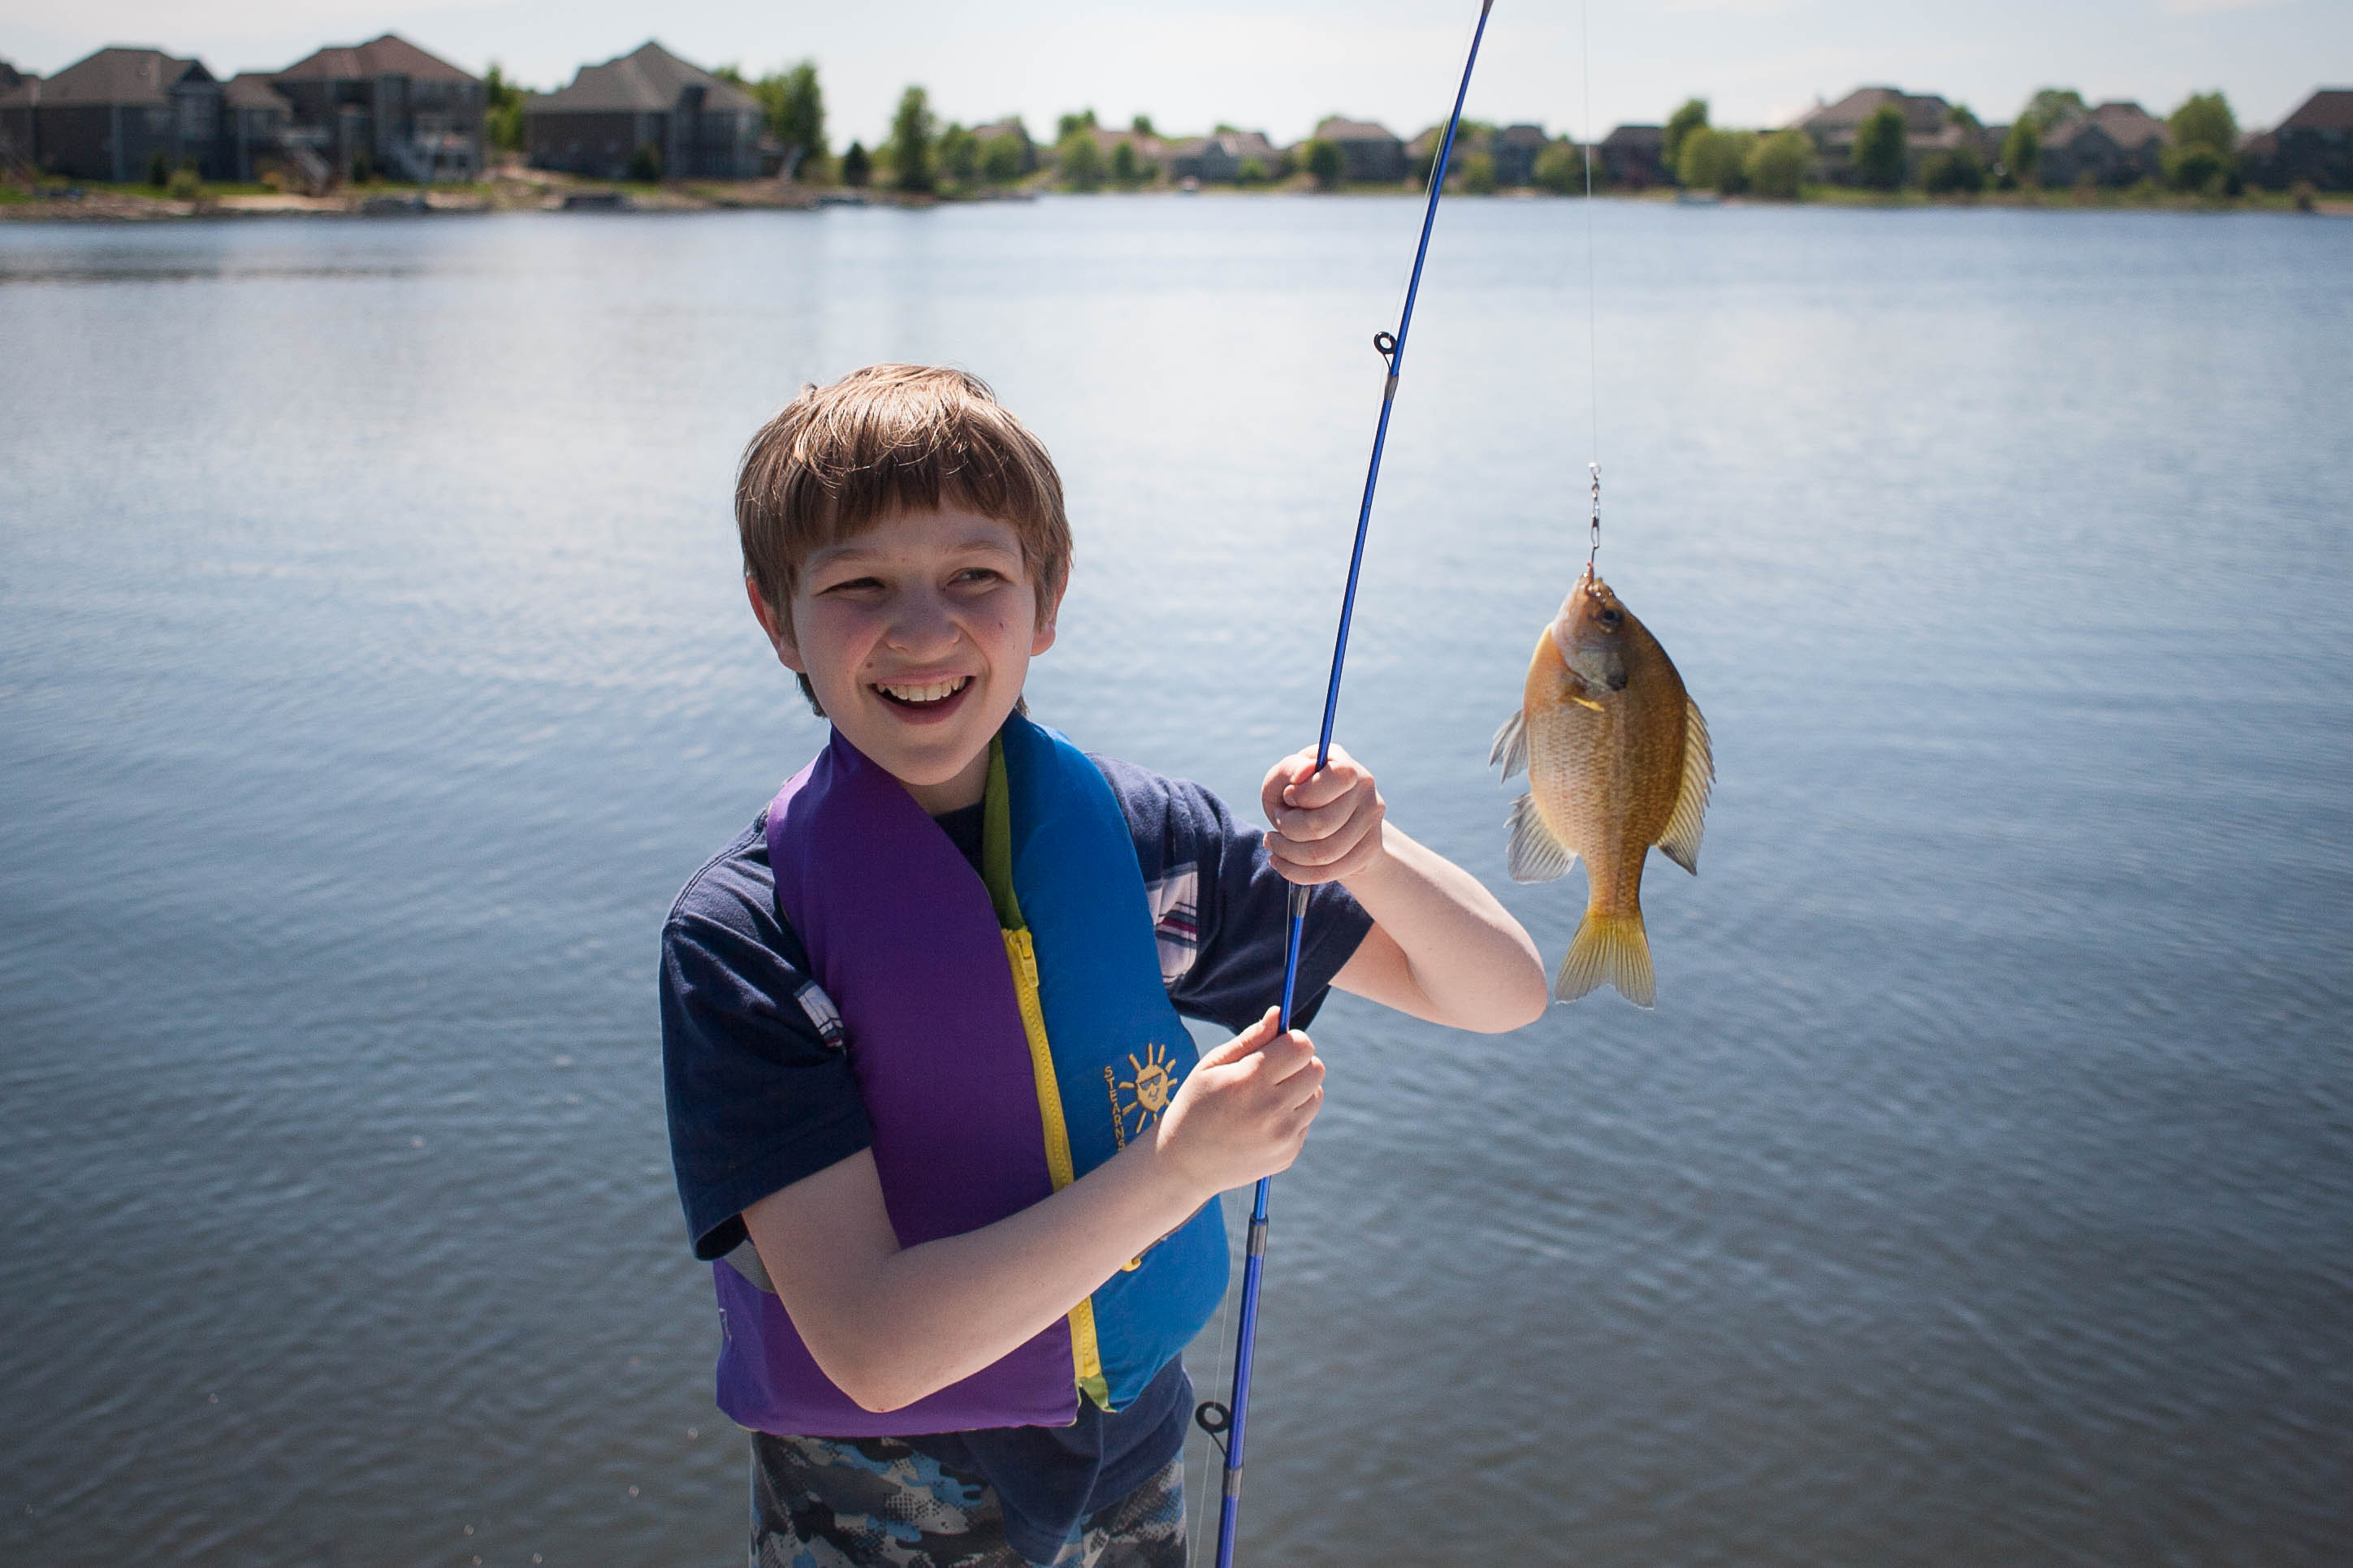 A boy wearing a life jacket smiling at a fish he just caught